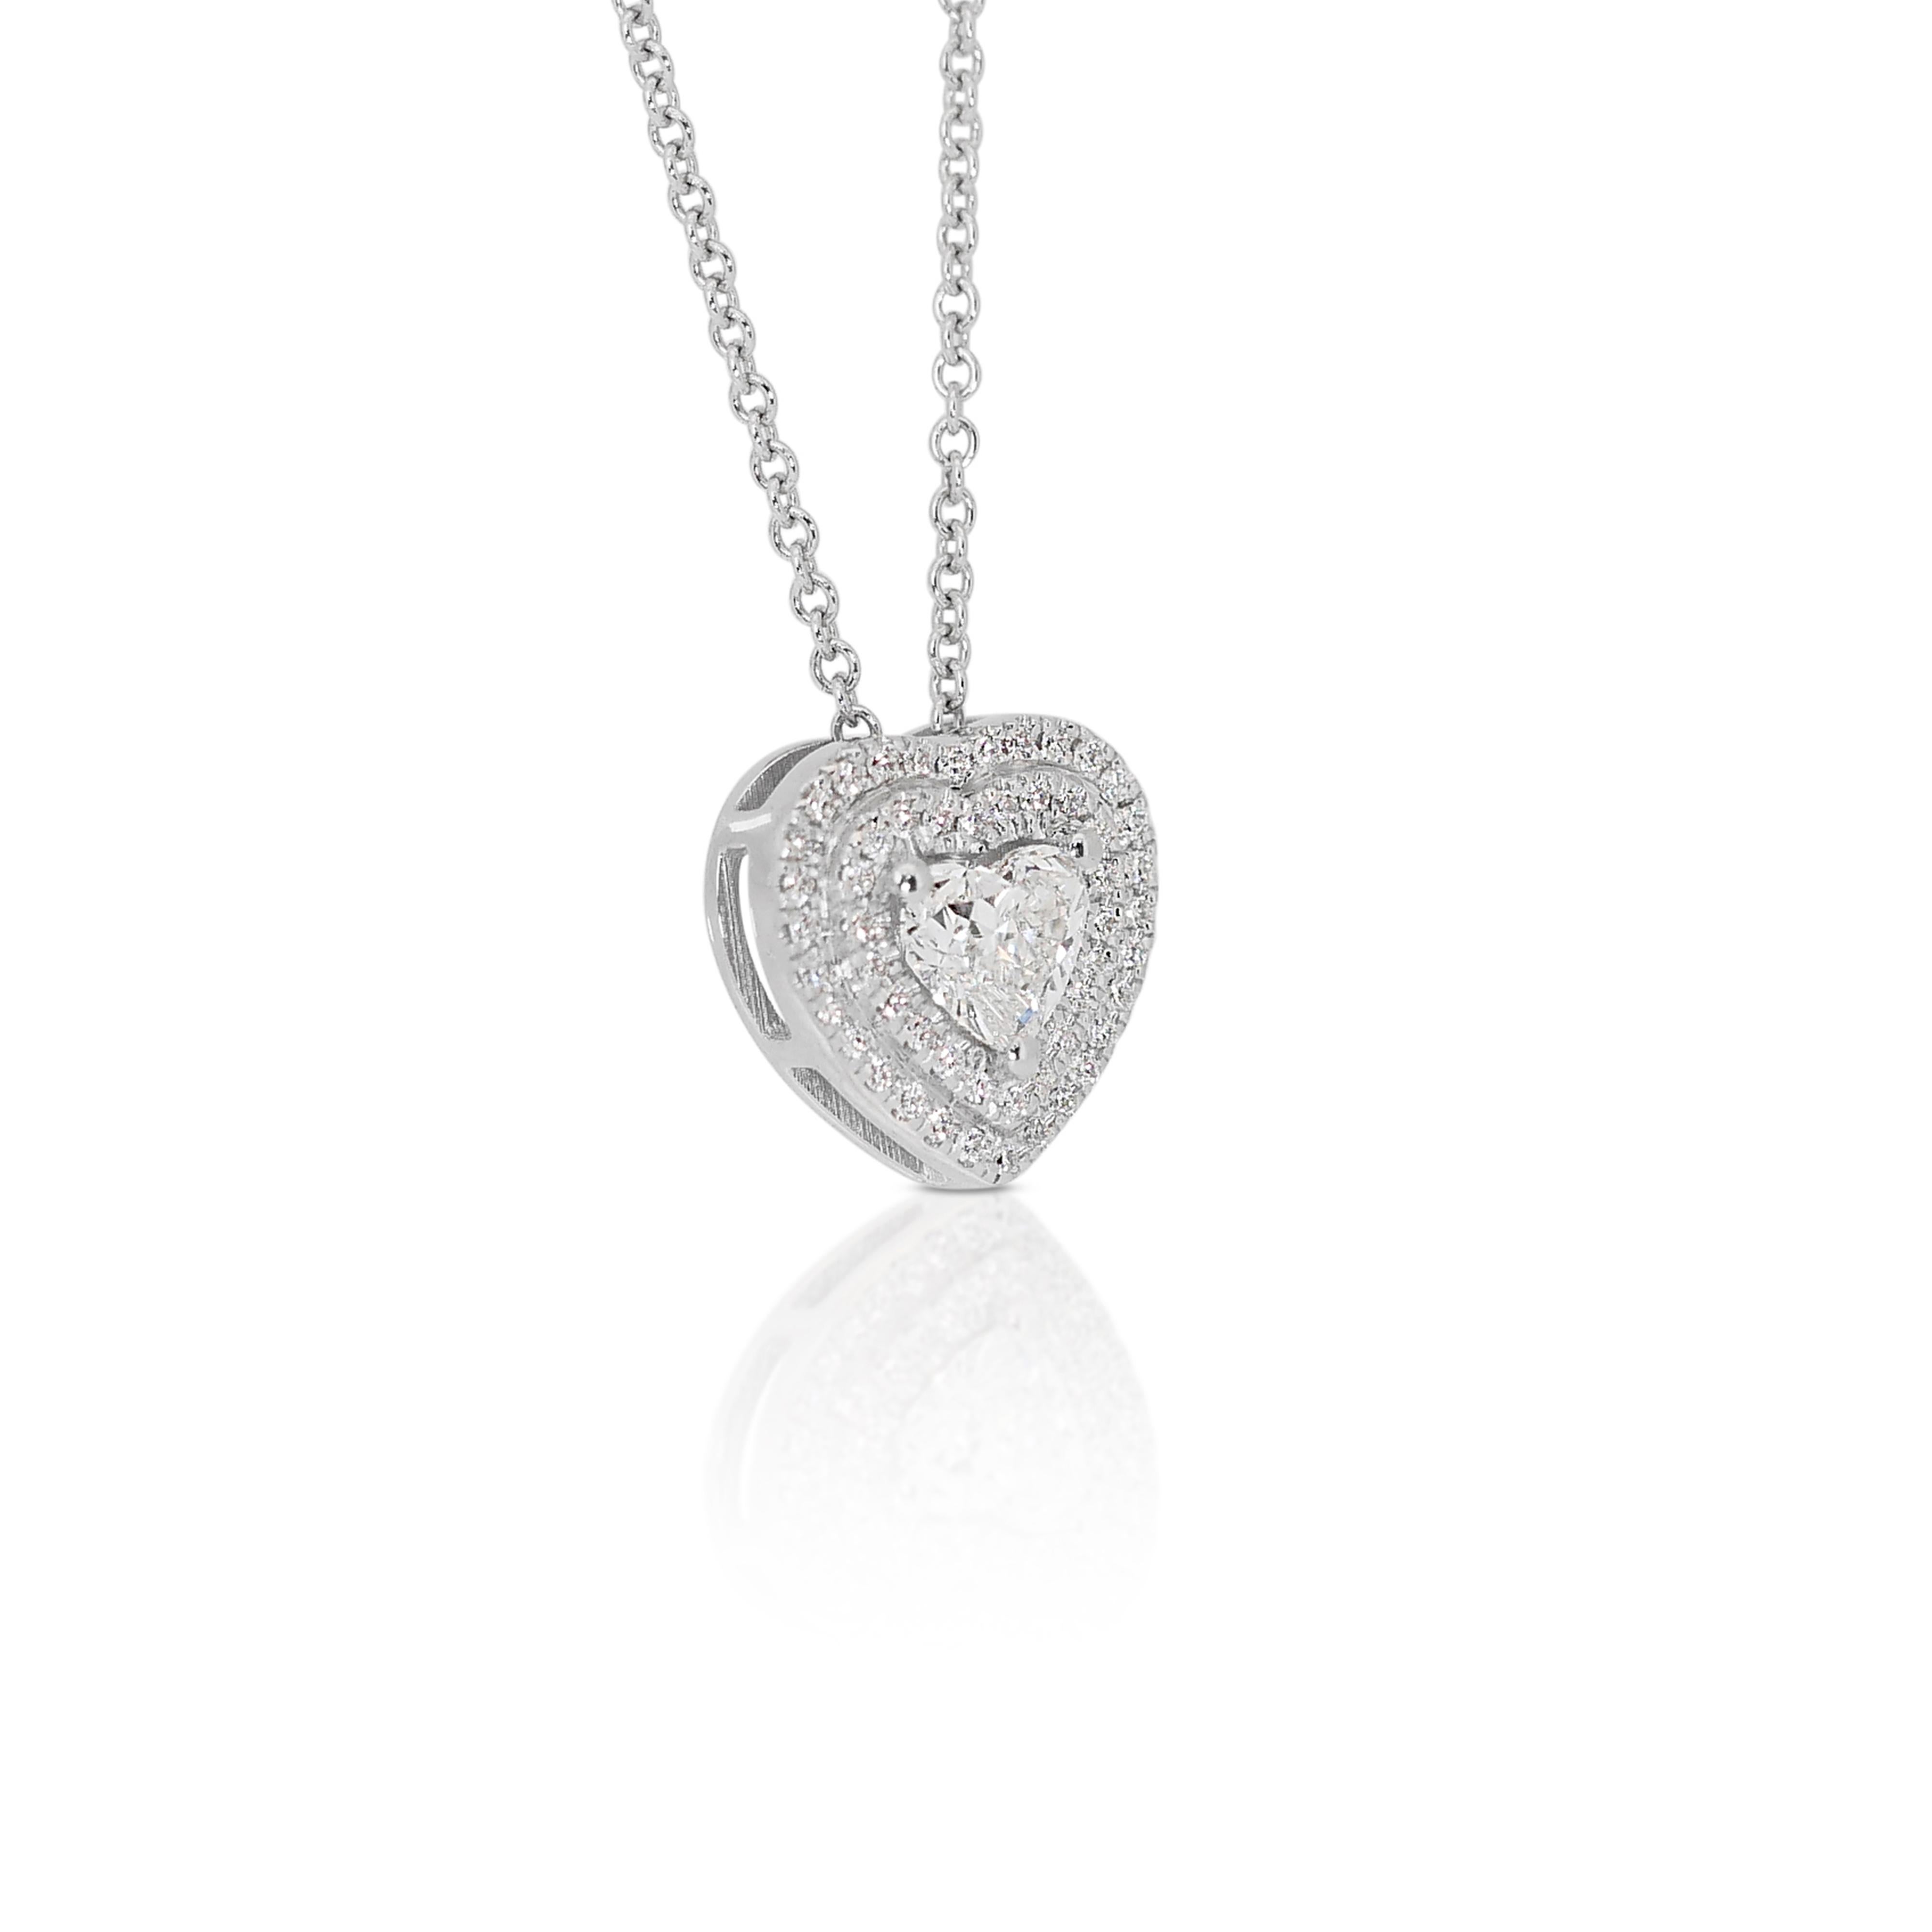 Elegant 0.80ct Heart-Shaped Diamond Halo Necklace in 18k White Gold - GIA Certif For Sale 2